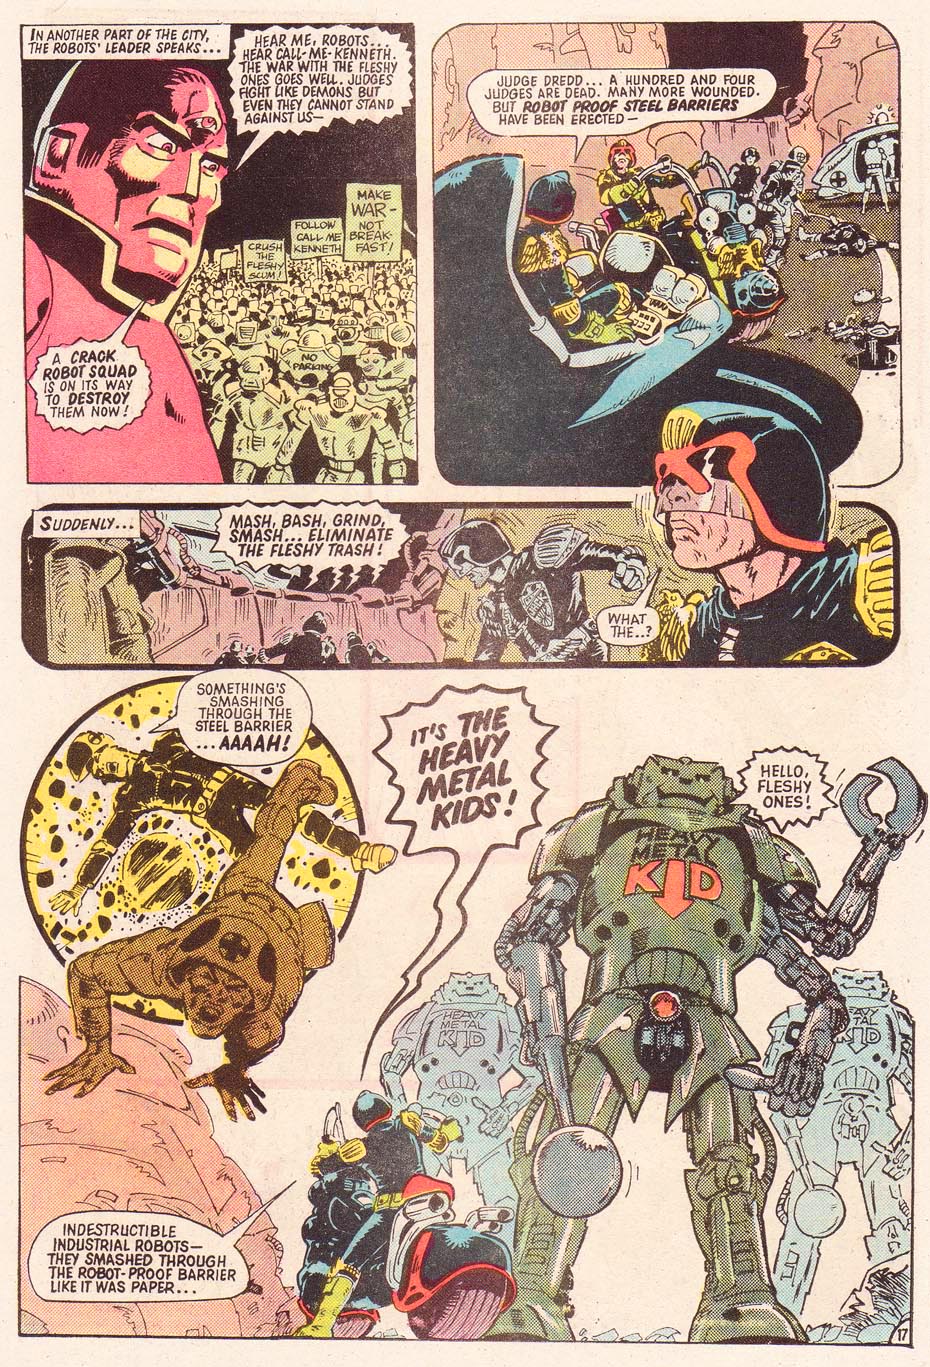 Judge Dredd: The Early Cases issue 1 - Page 19